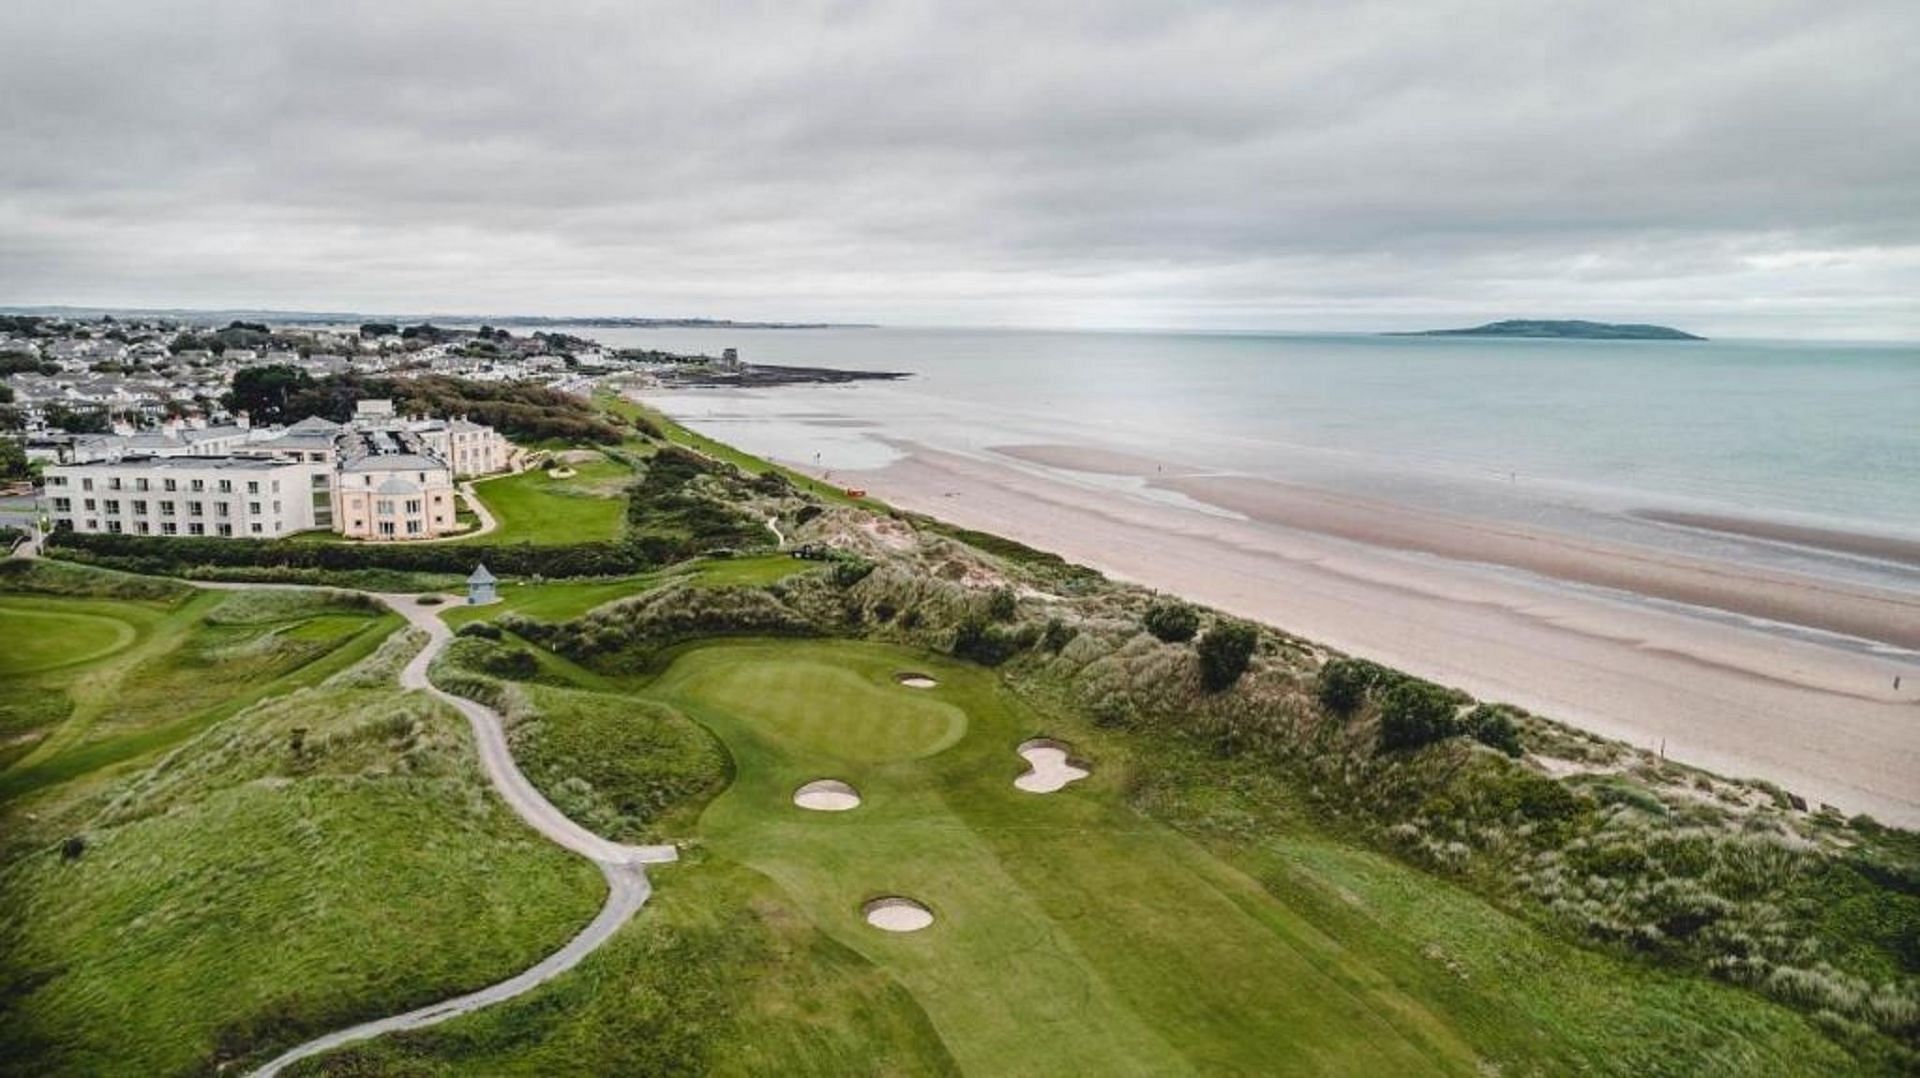 Portmarnock Golf Club is being discussed as a potential host for the Open Championship in future